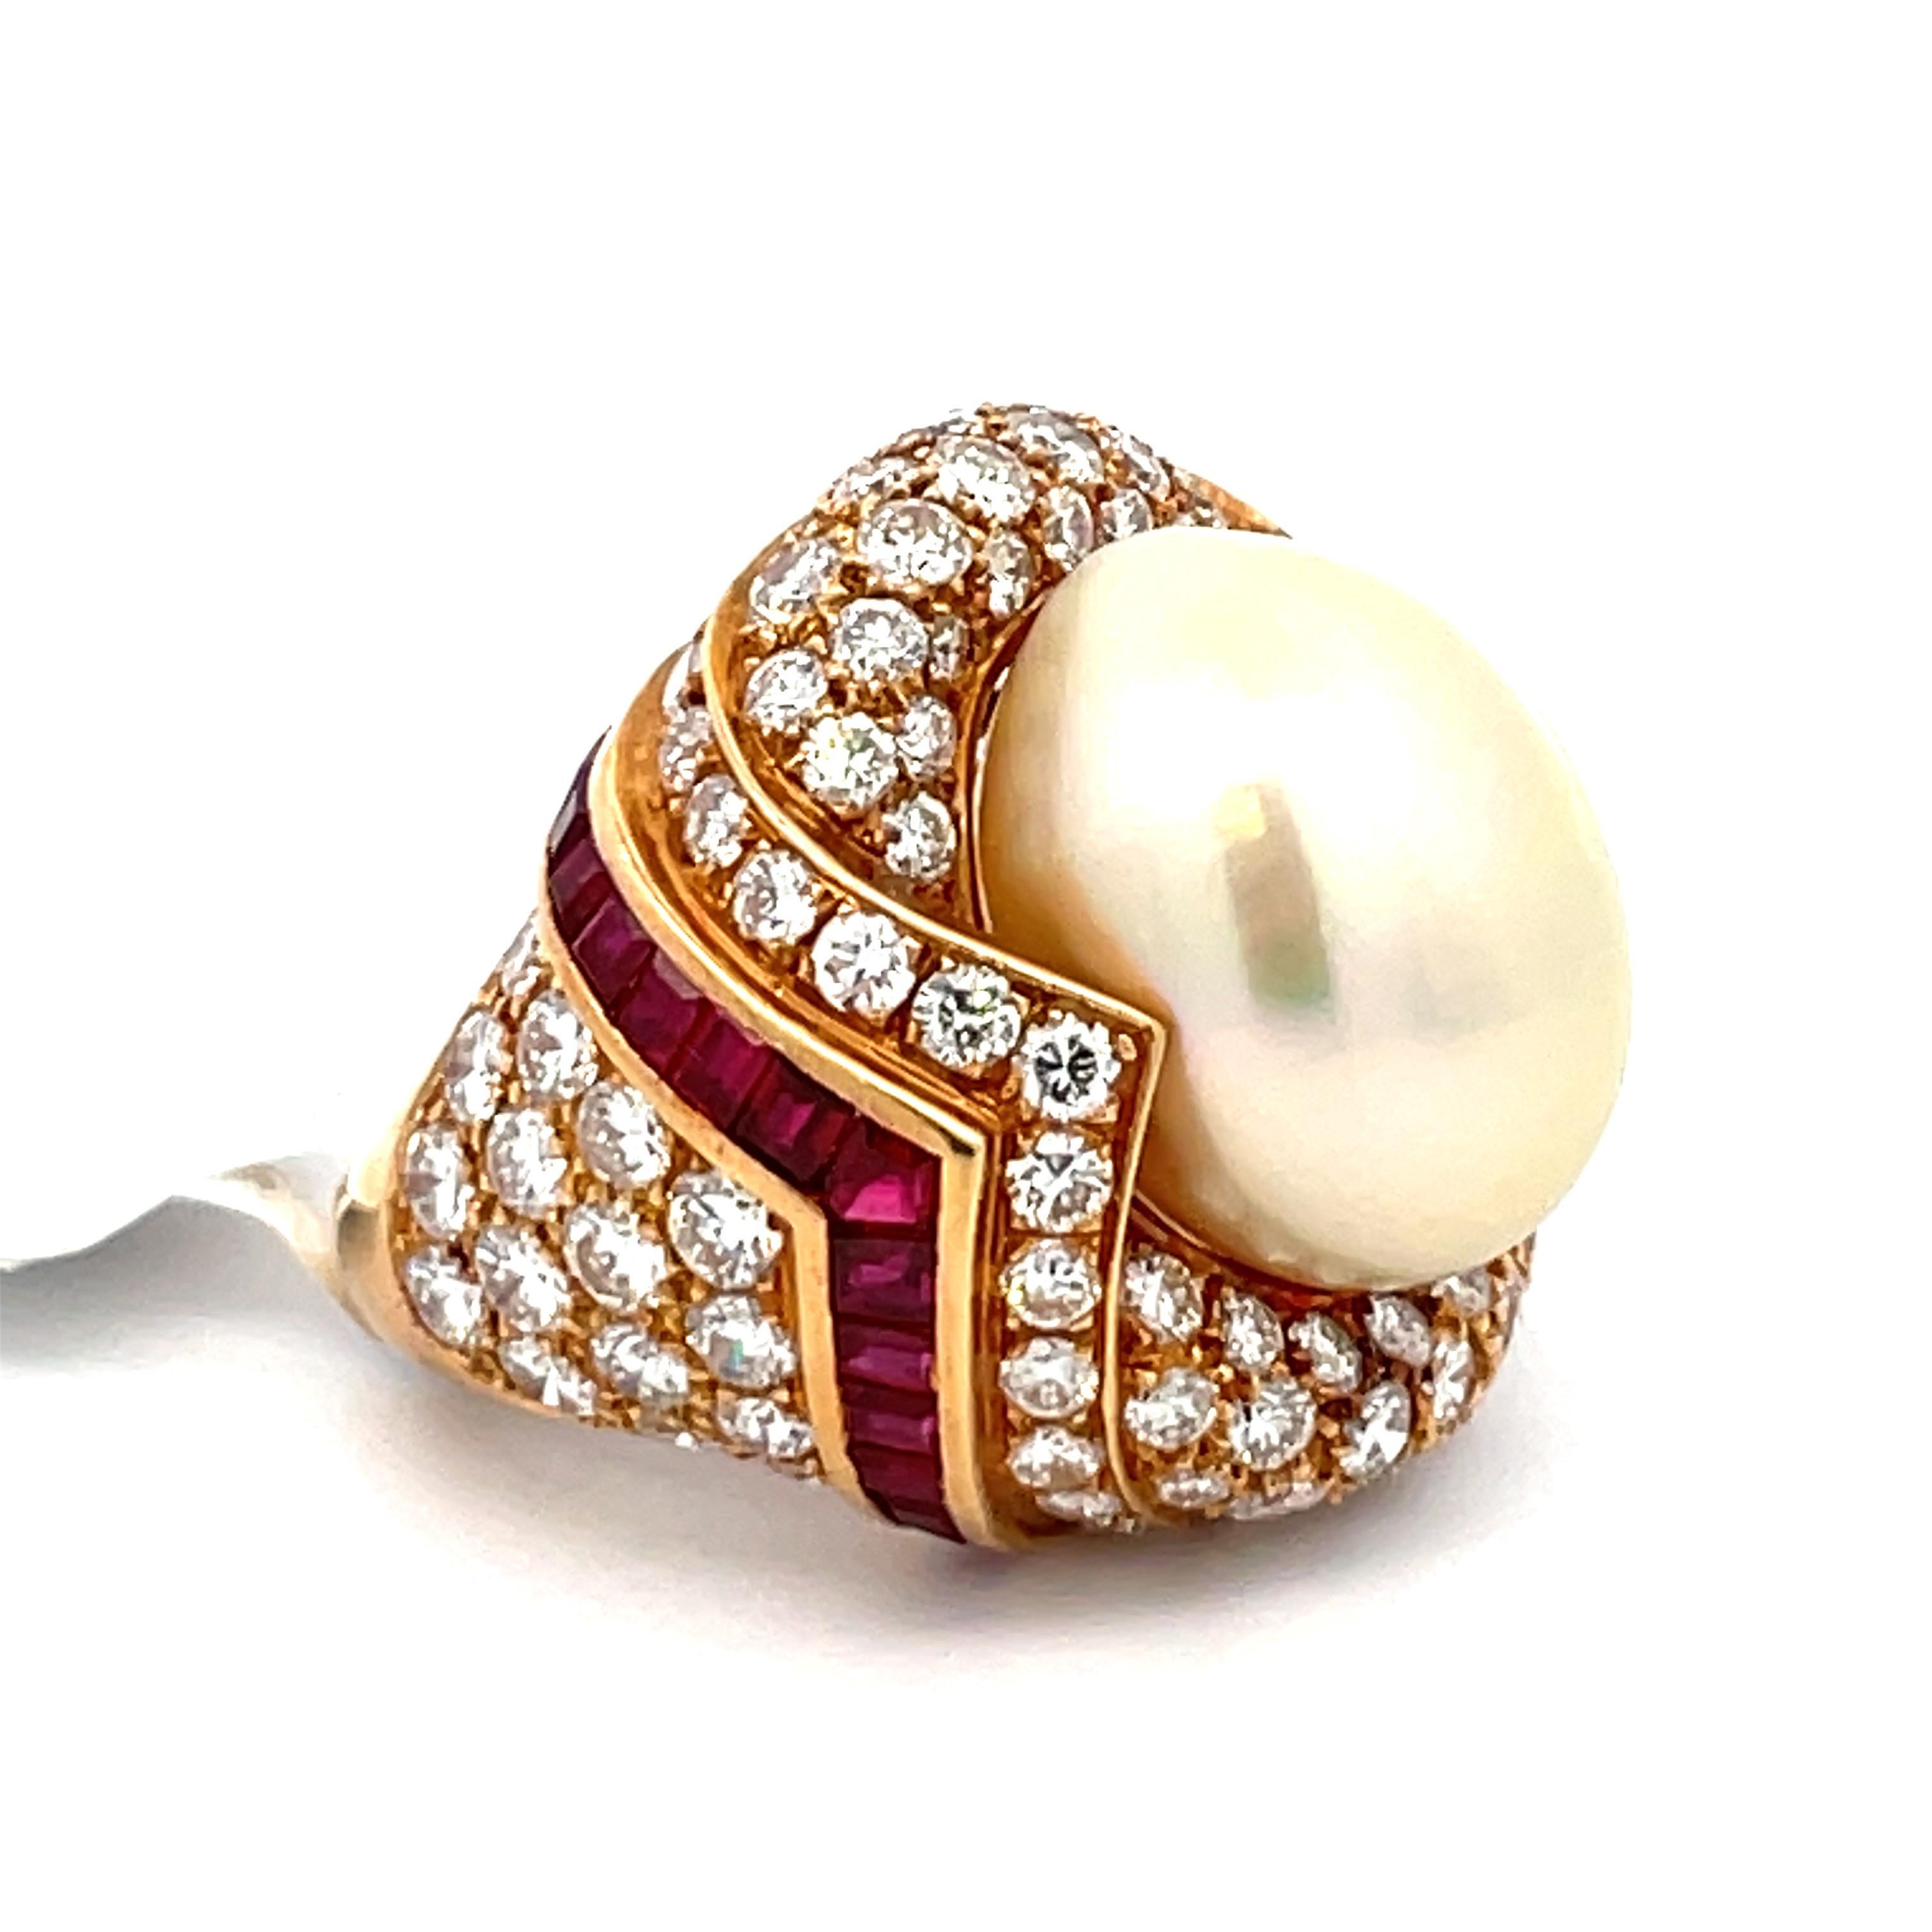 Women's Mauboussin Paris GIA Certified South Sea Pearl Diamond Ruby Dome Cocktail Ring 